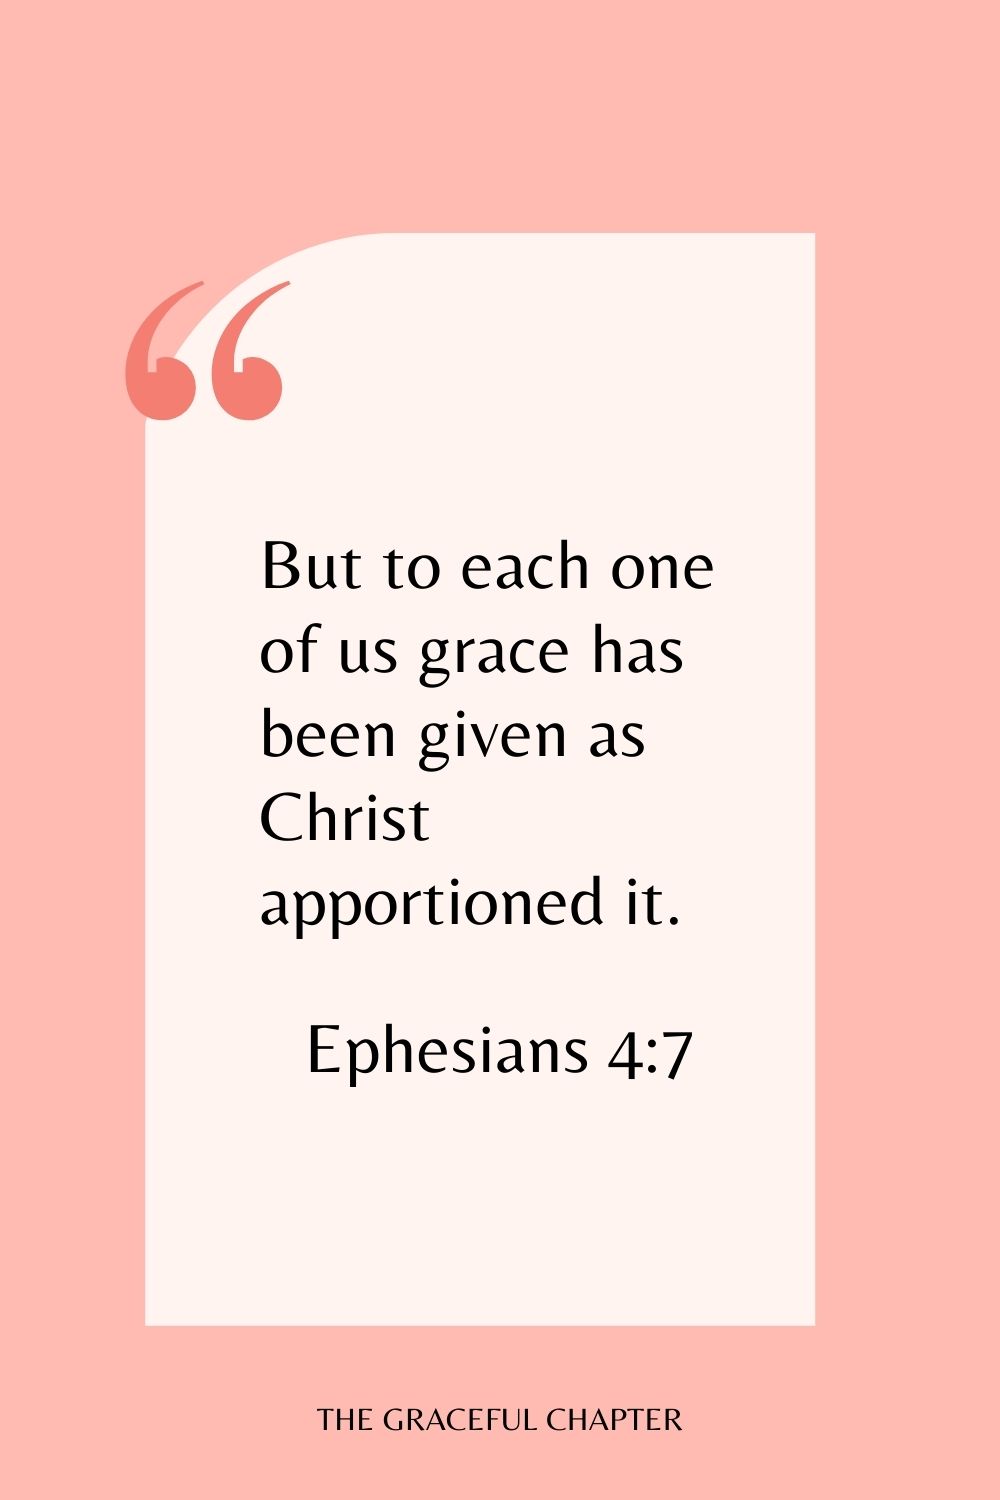 But to each one of us grace has been given as Christ apportioned it. Ephesians 4:7